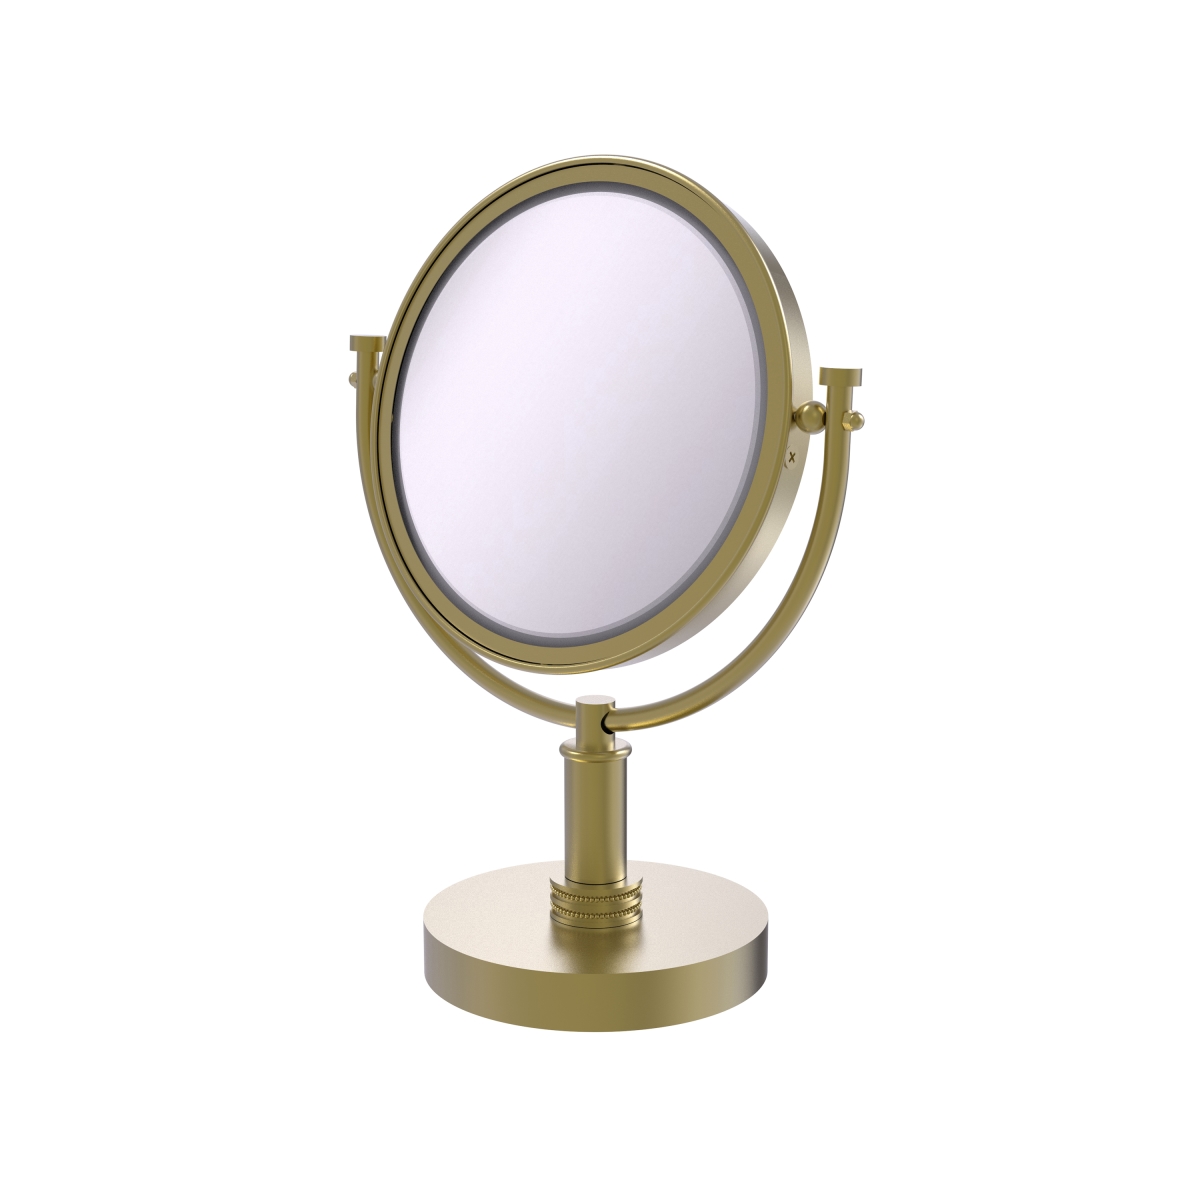 Dm-4d-3x-sbr Dotted Ring Style 8 In. Vanity Top Make-up Mirror 3x Magnification, Satin Brass